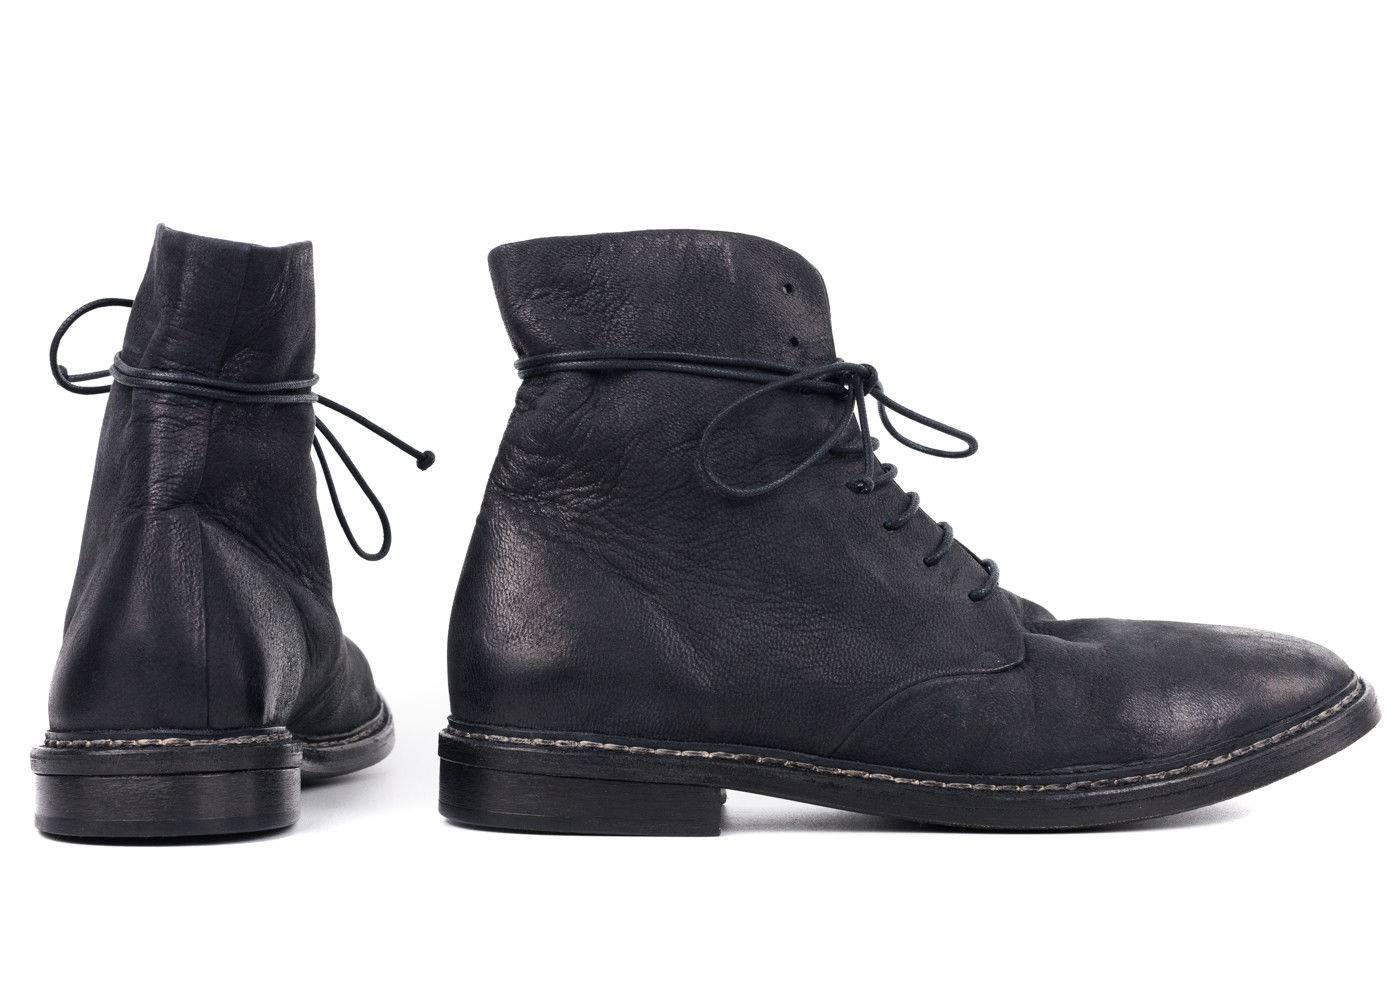 Marsell Mens Smoke Black Worn Leather Grupiatta Combat Boots In New Condition For Sale In Brooklyn, NY